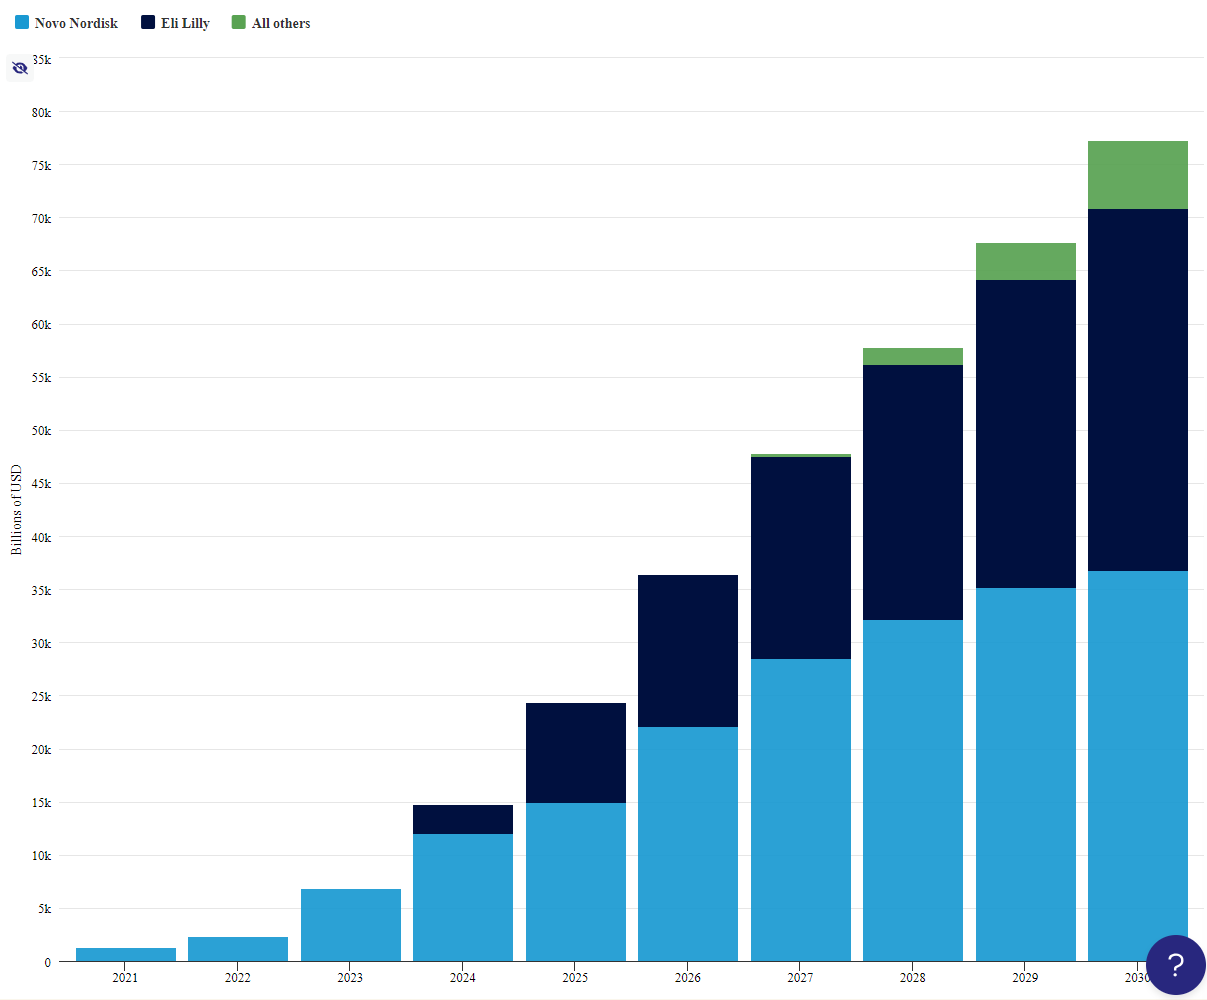 Novo Nordisk, Eli Lilly, All others - Bar chart